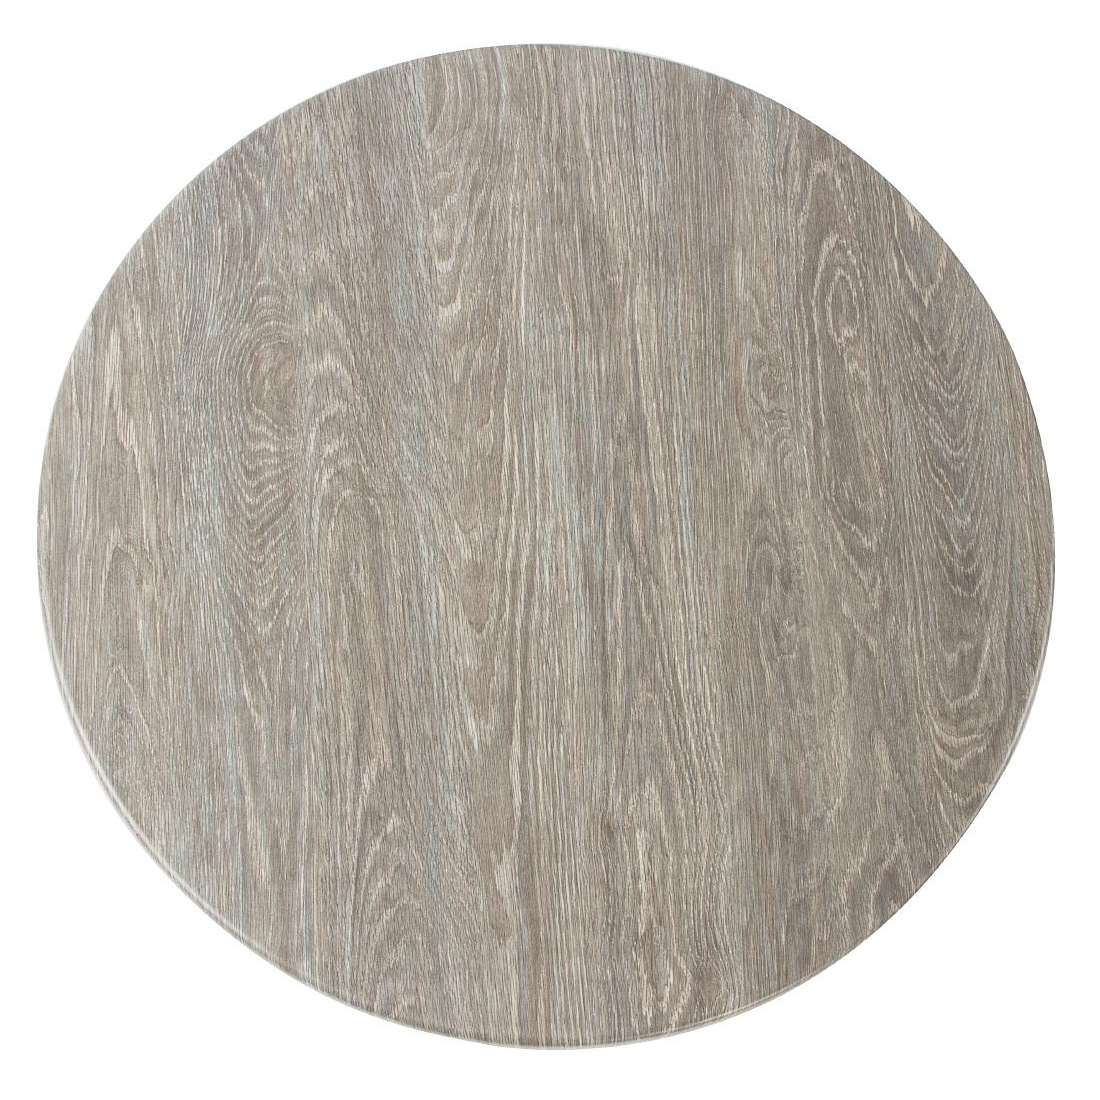 Werzalit Pre-drilled Round Table Top  Limed Oak 700mm